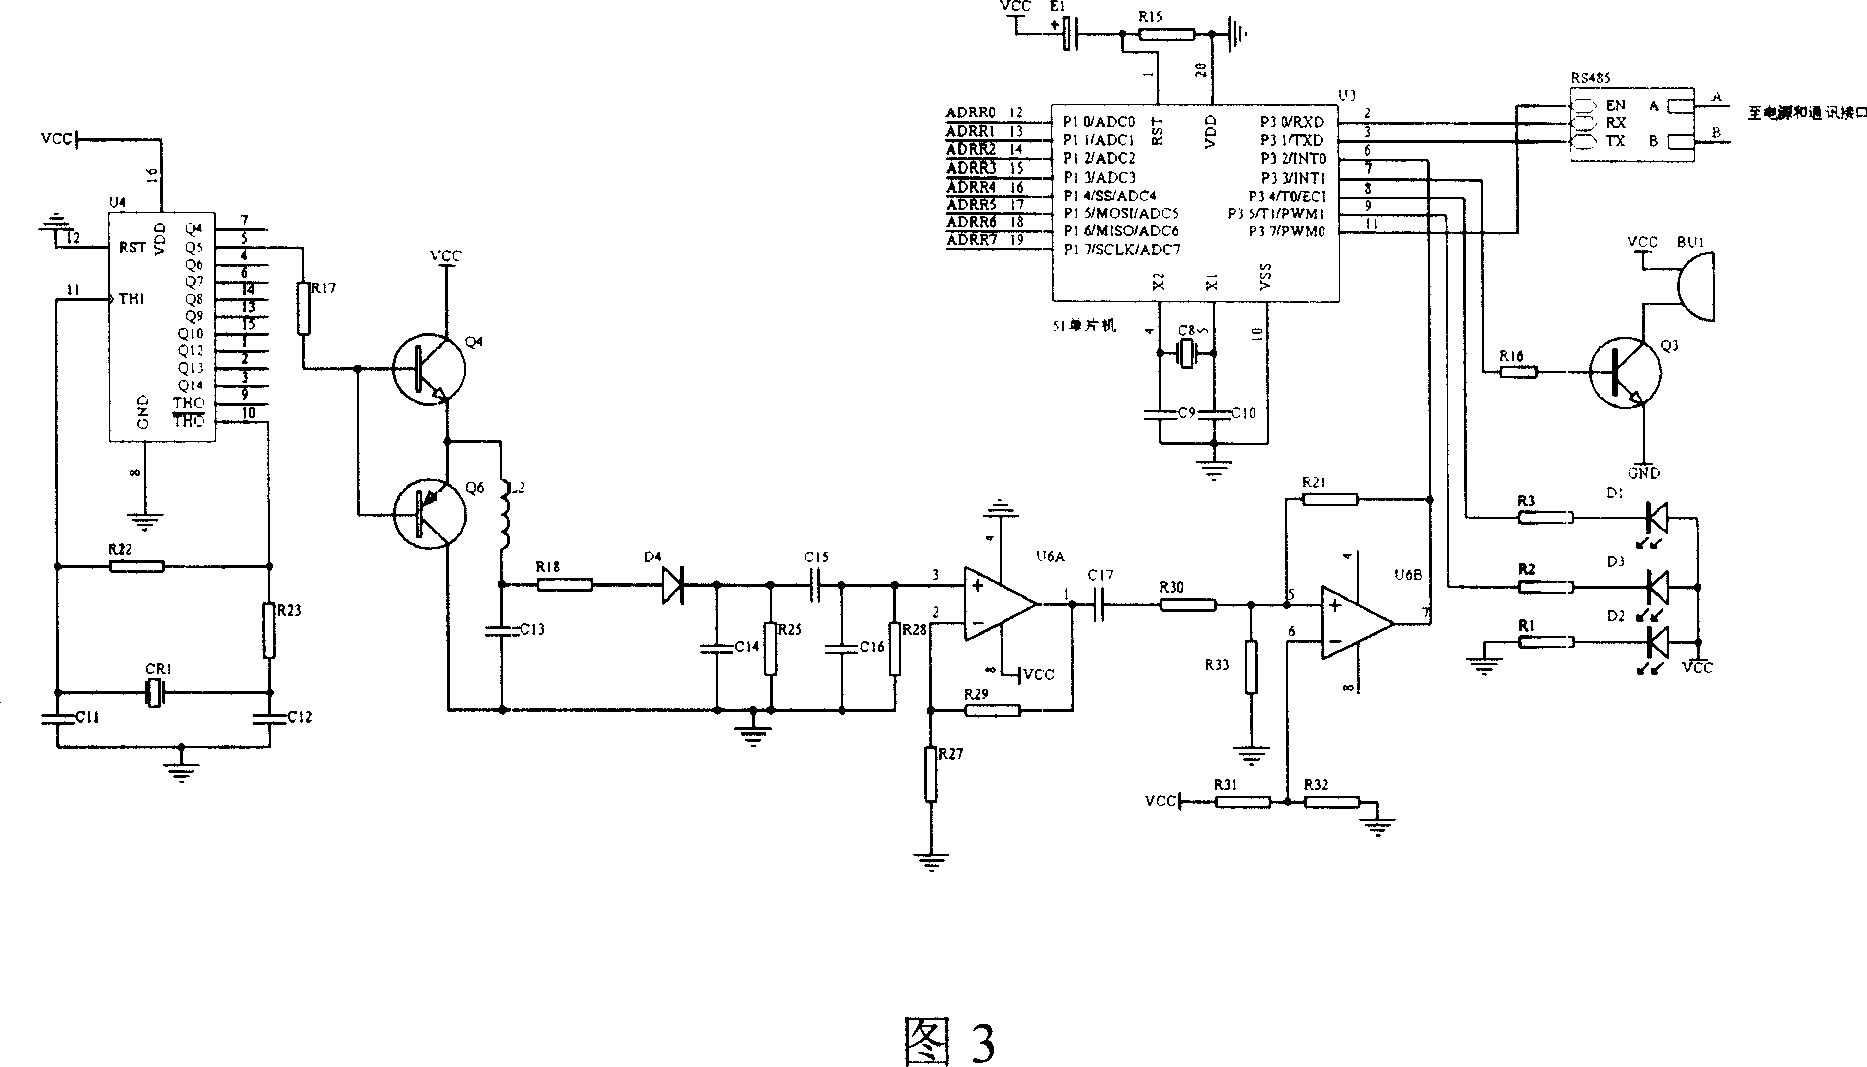 Concrete internal temperature detecting device based on induction princinple